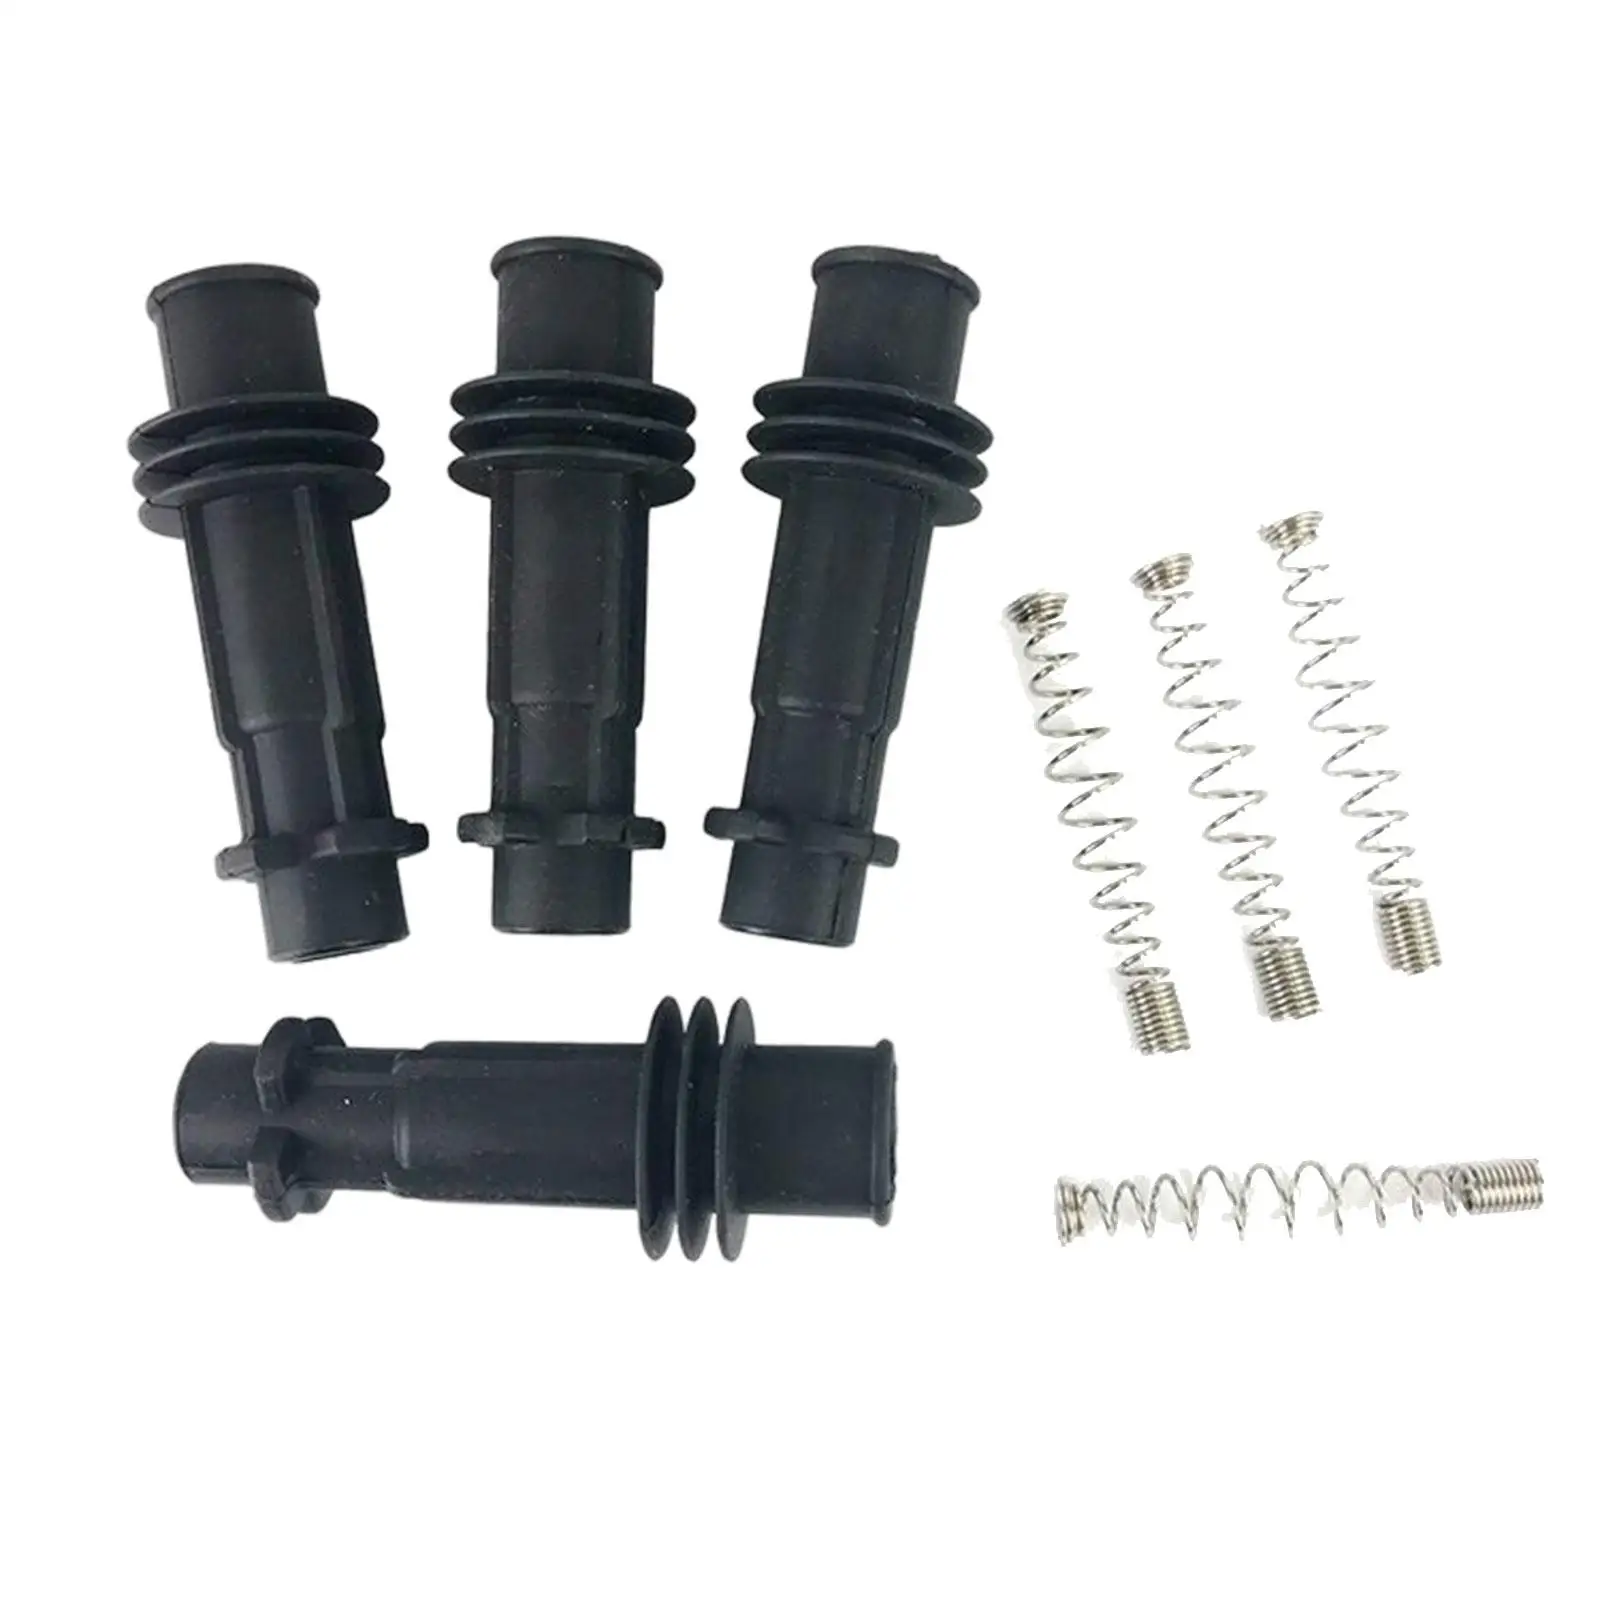 4x Vehicle Ignition Coil Pack Spring Repair Set for Vauxhall Corsa Adam